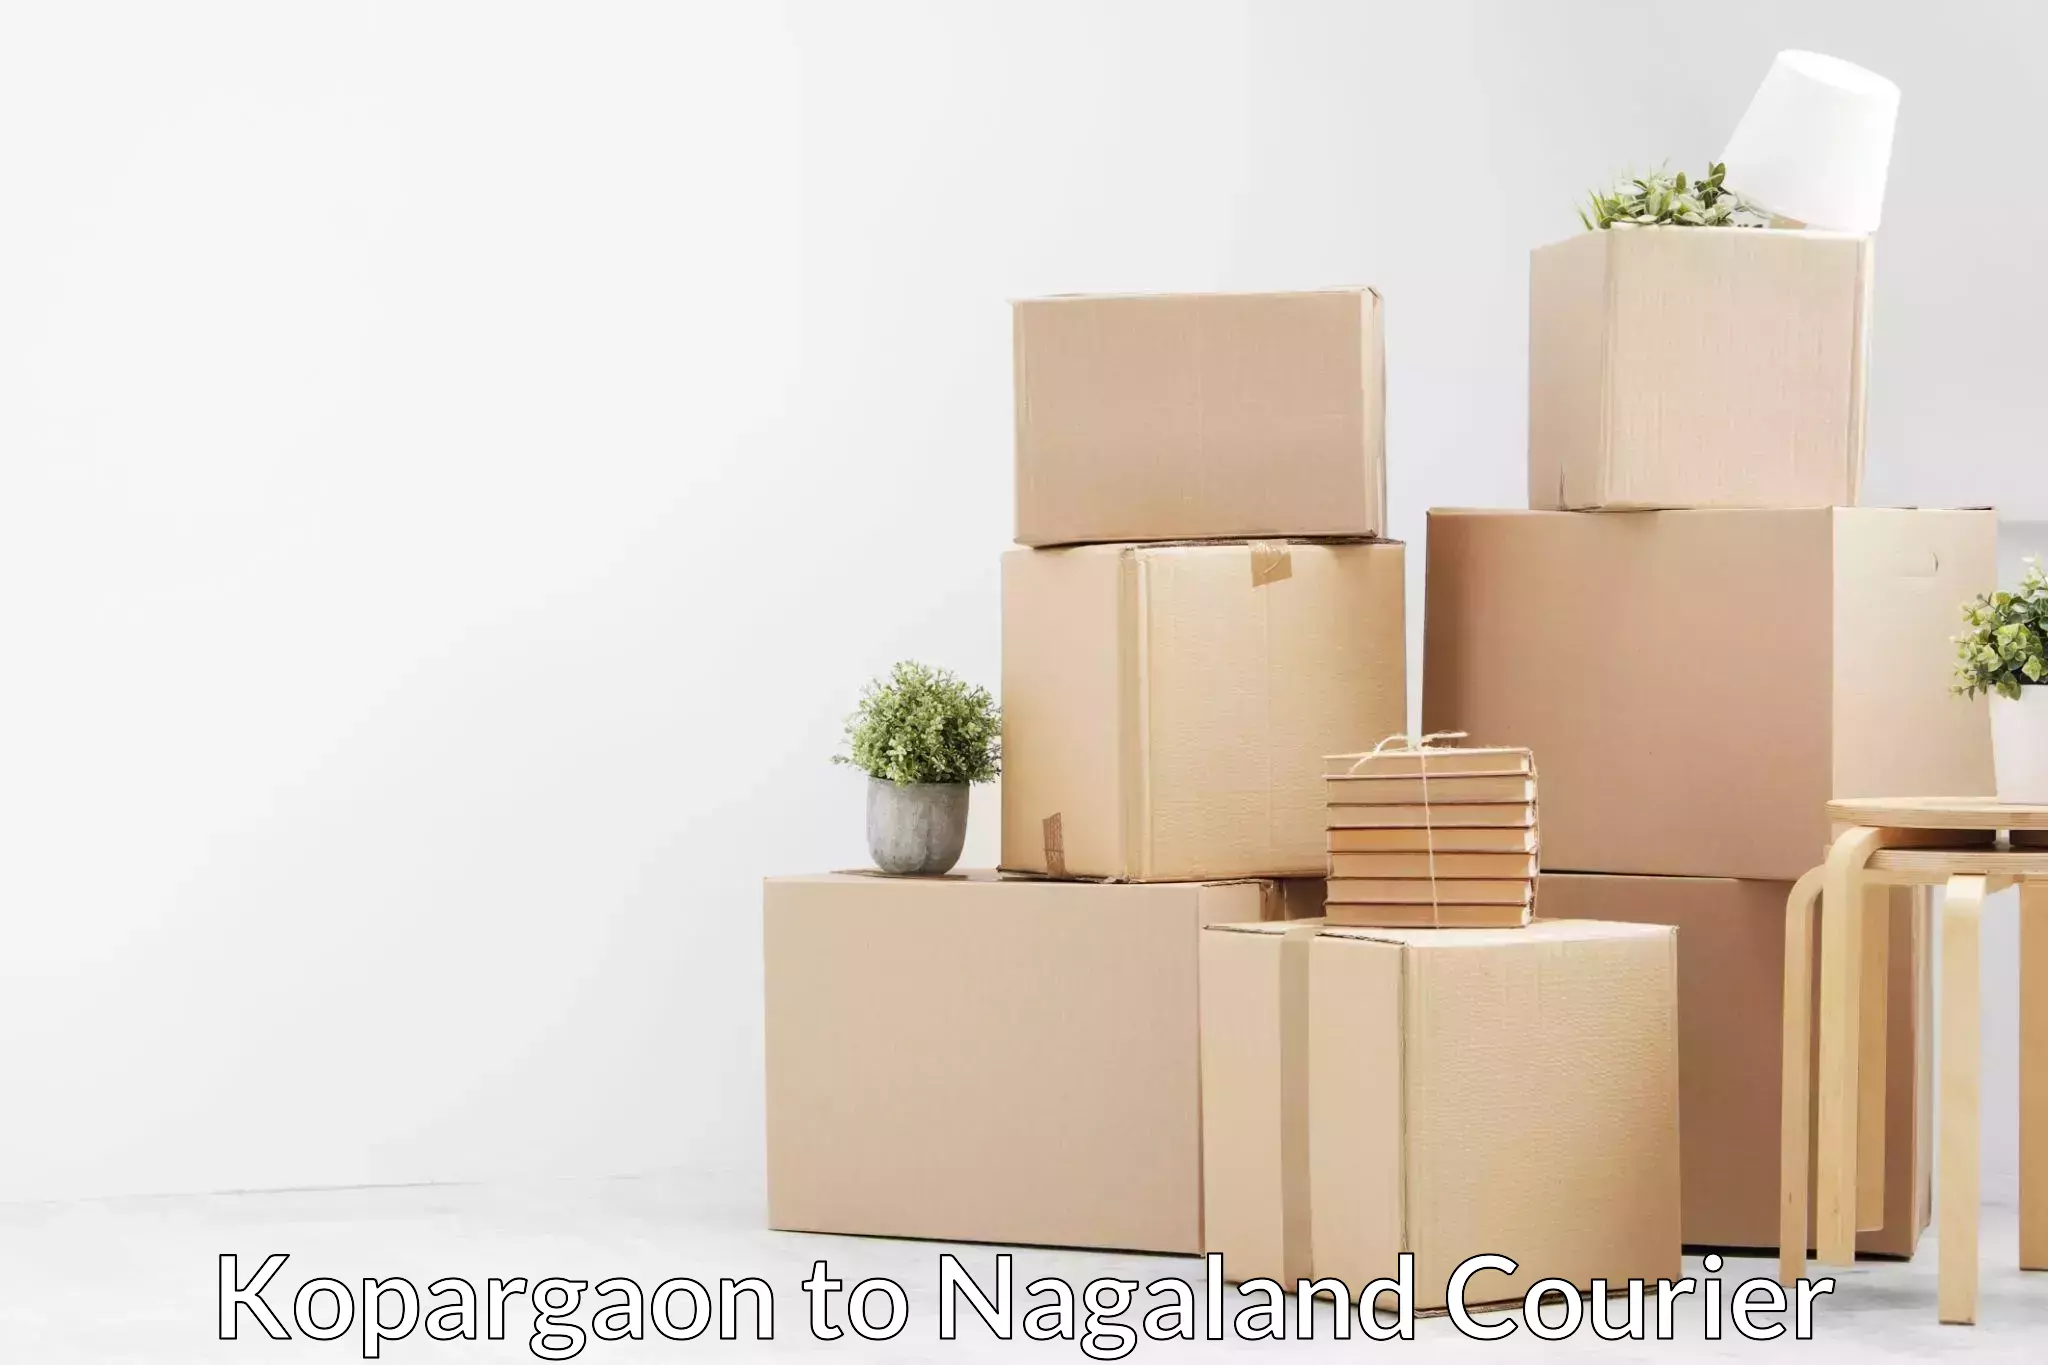 Furniture delivery service Kopargaon to Mokokchung